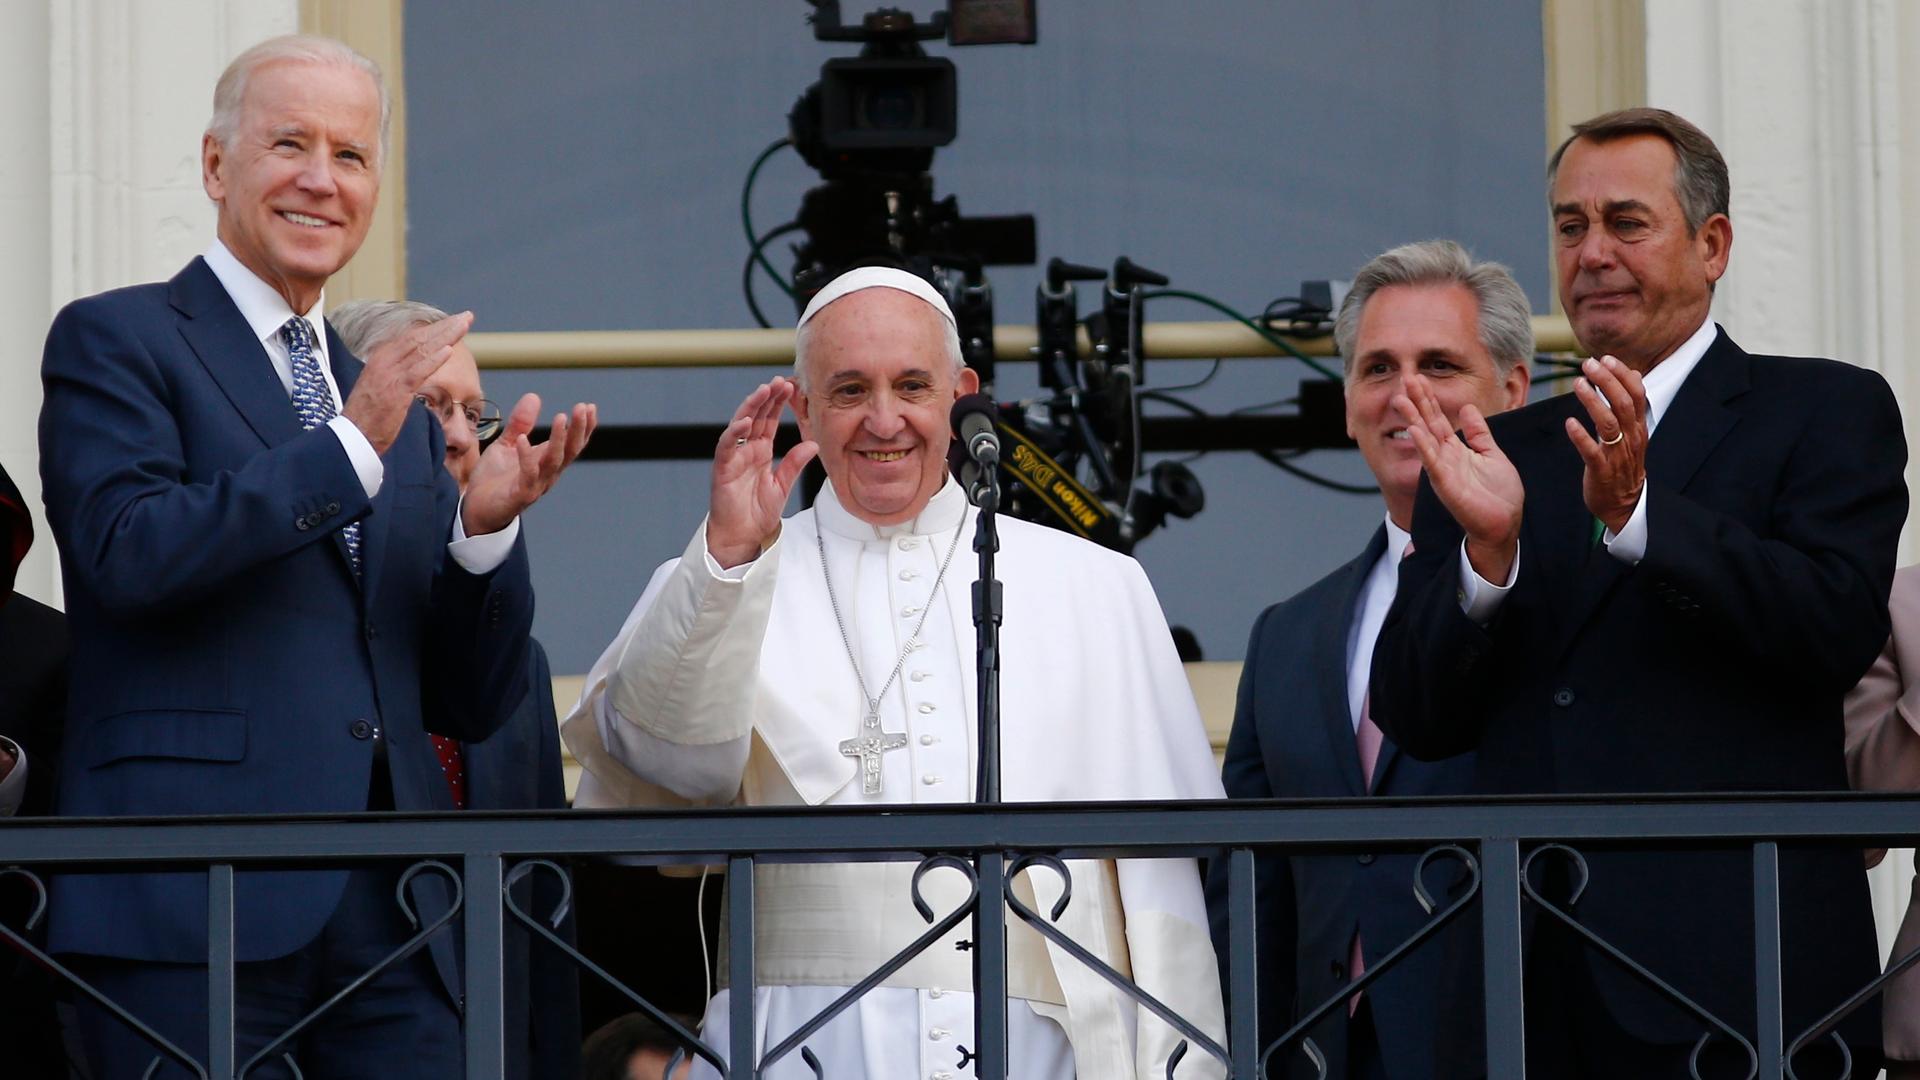 Pope Francis waves to the crowd from the Speaker's Balcony on the West Front of the Capitol as he stands with Vice President Joe Biden (L) and Speaker of the House John Boehner (R) after concluding his address before a joint meeting of the U.S. Congress o